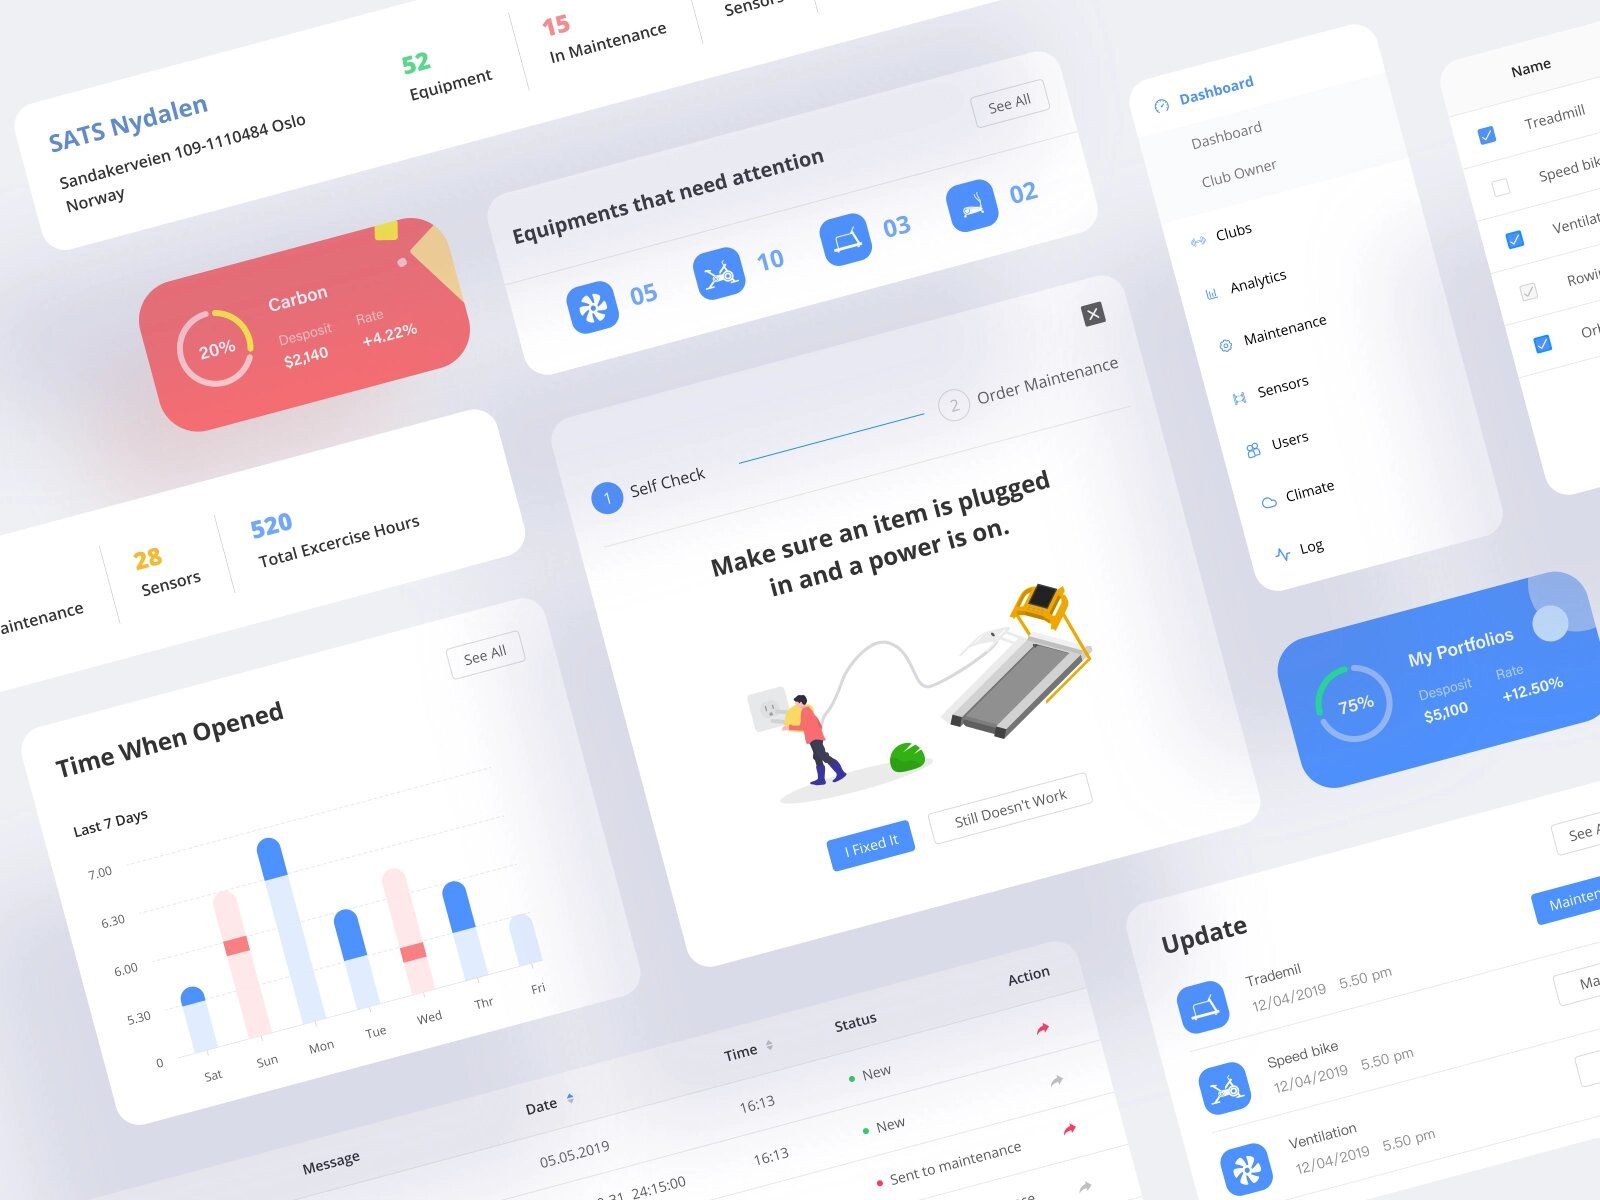 To reduce the strain that gym equipment gets, especially from group fitness, you can track its usage with help of IoT technology and take appropriate measures to prolong its usability (*image by [Syed Raju](https://dribbble.com/syedraju){ rel="nofollow" target="_blank" .default-md}*)